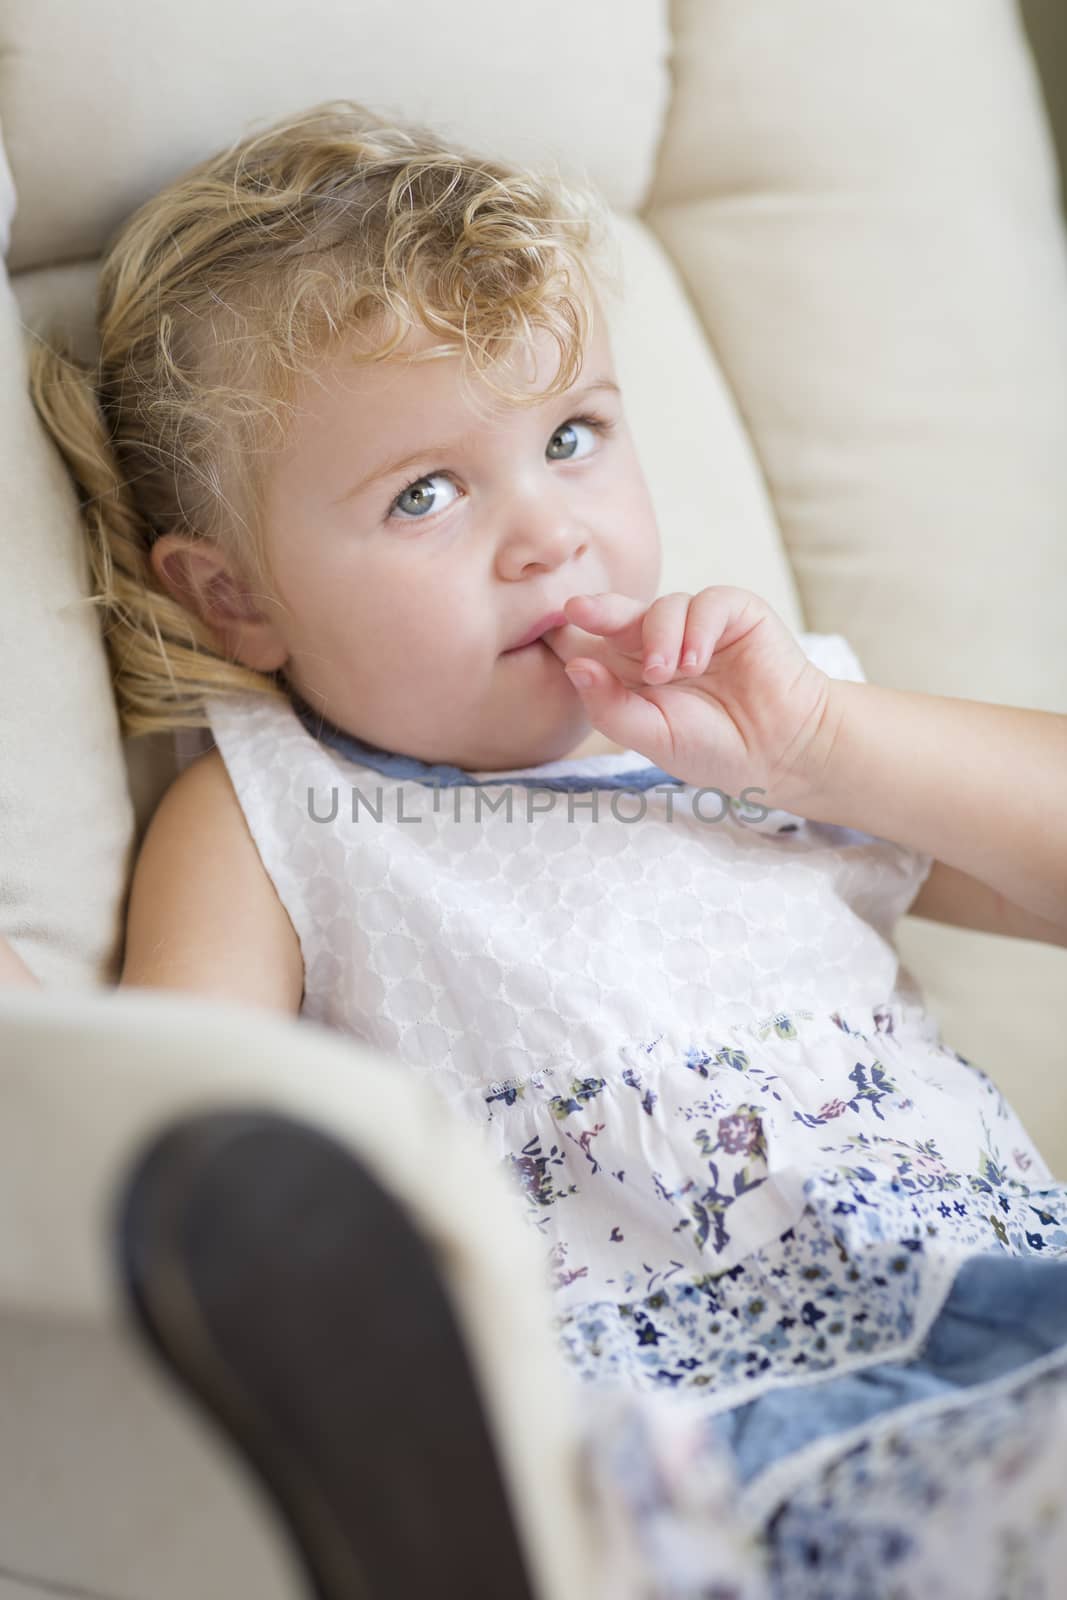 Adorable Blonde Haired and Blue Eyed Little Girl Sitting in Chair.